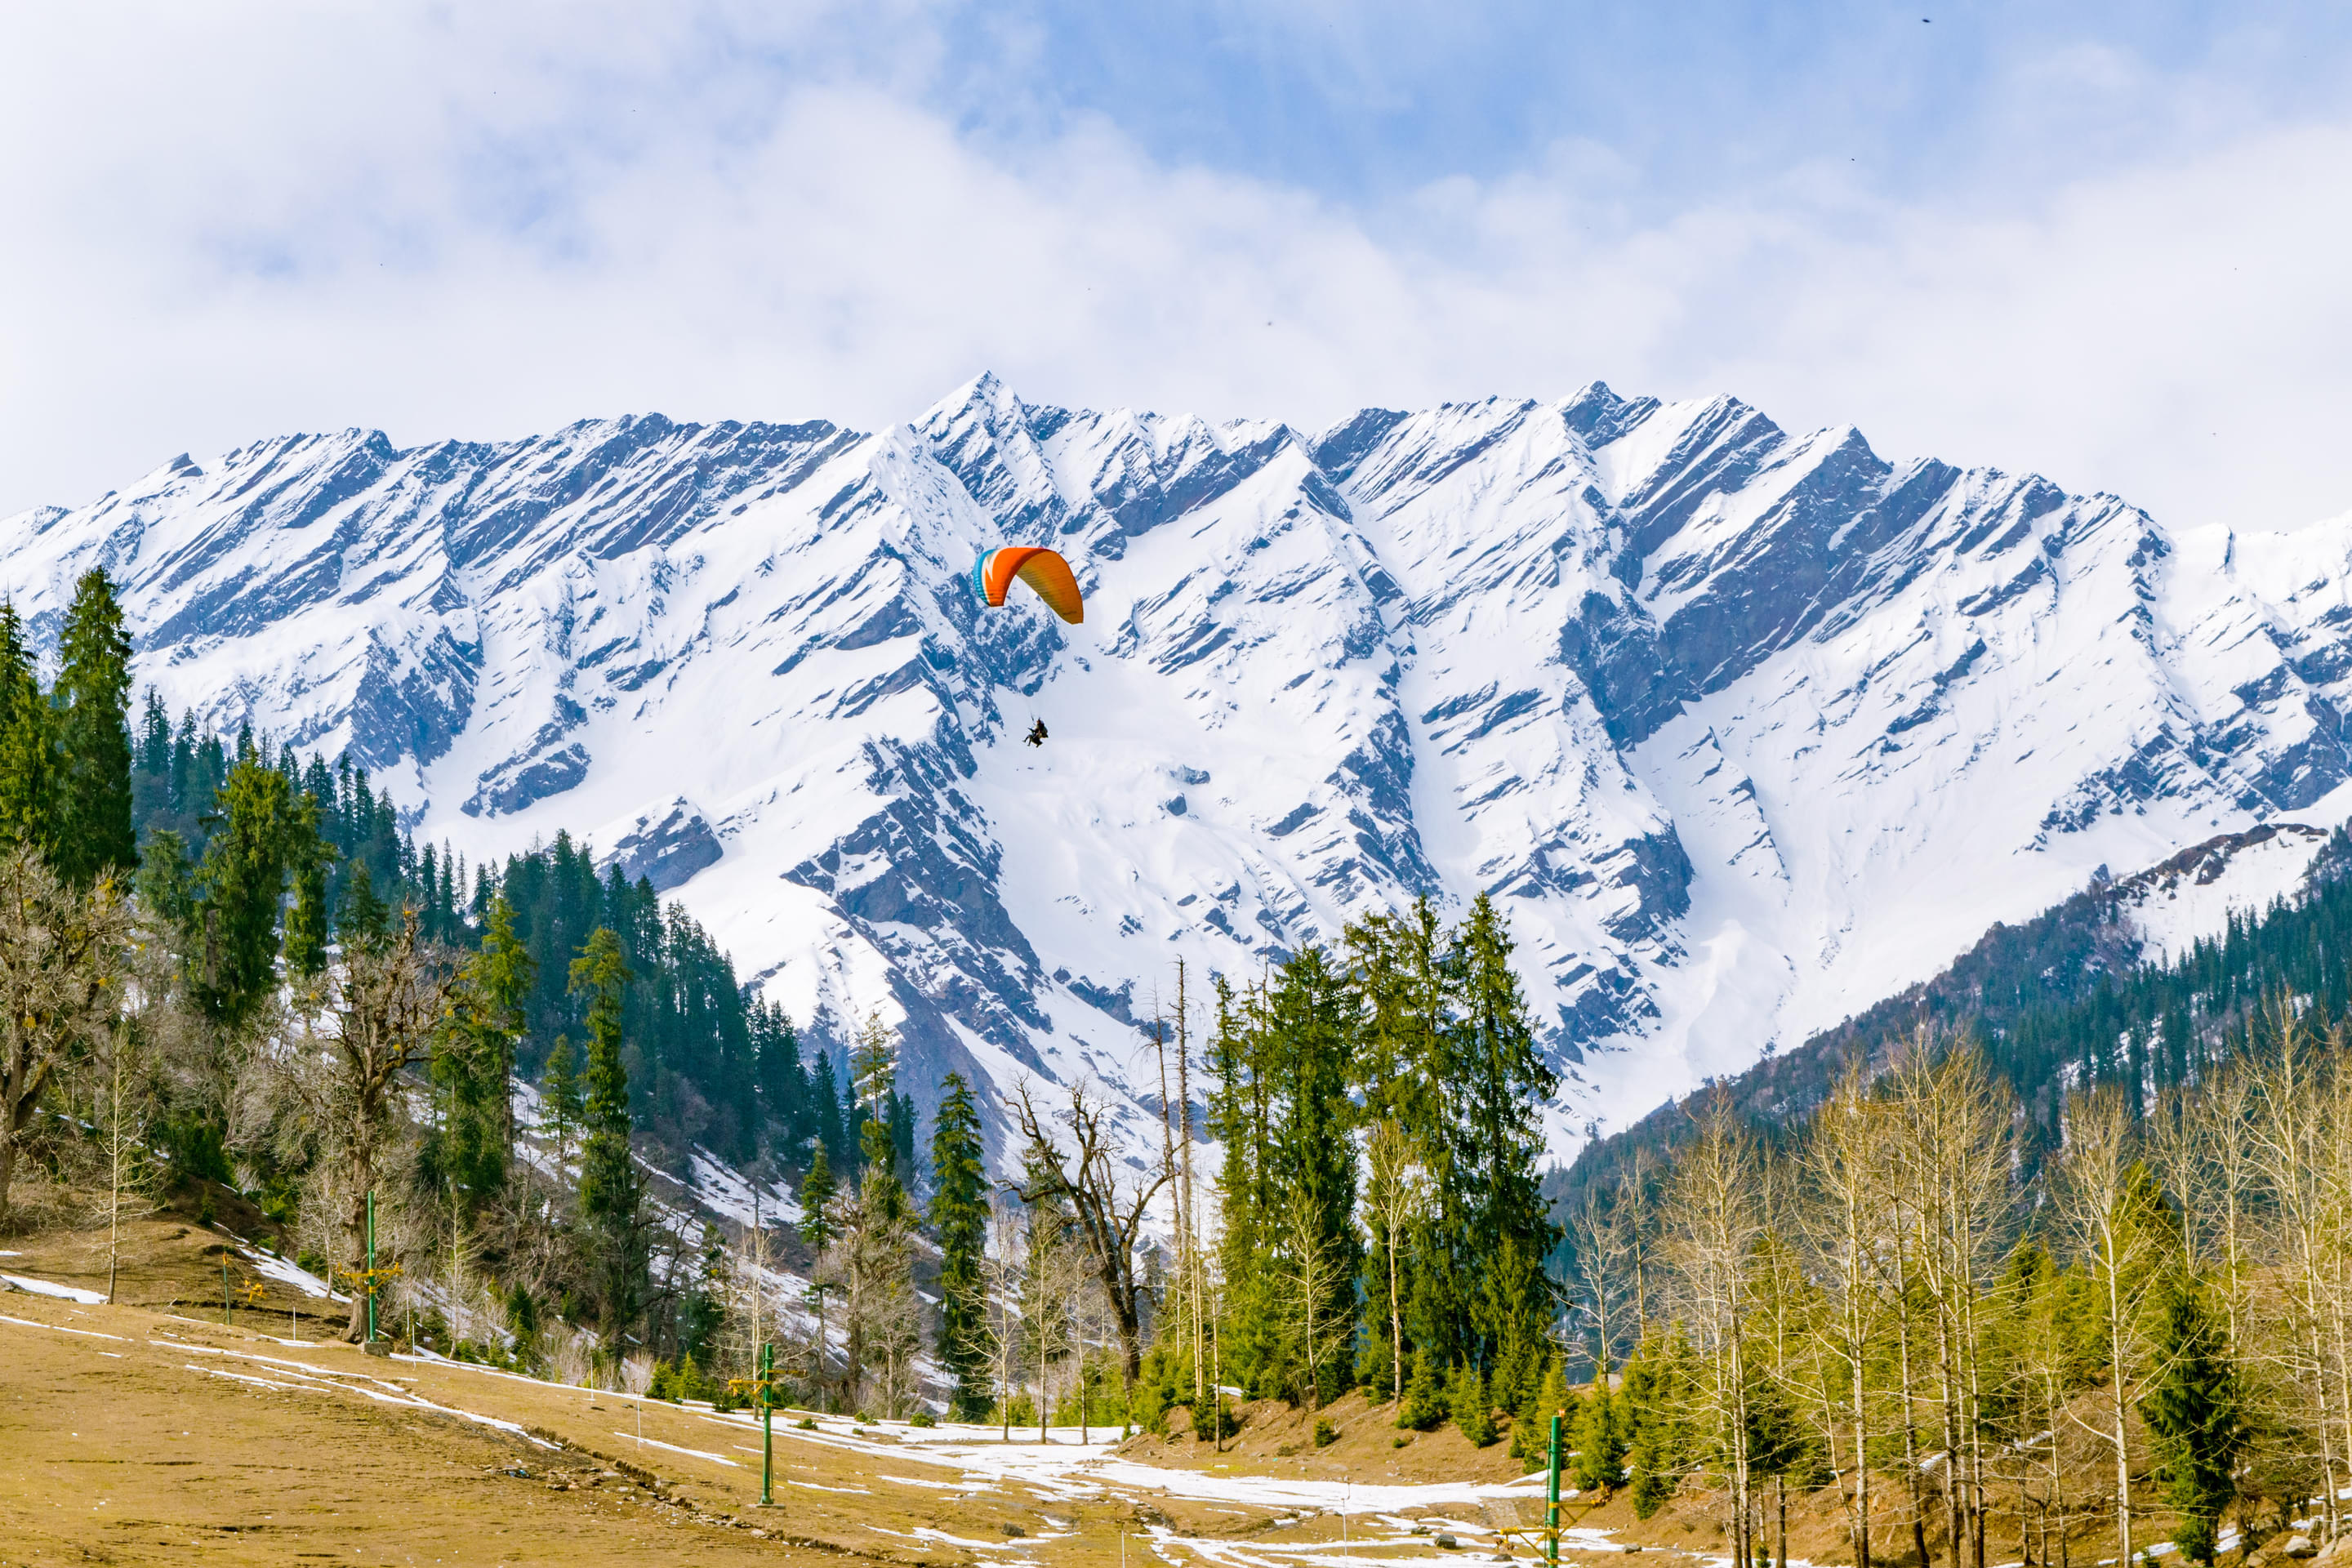 Things to Do in Manali